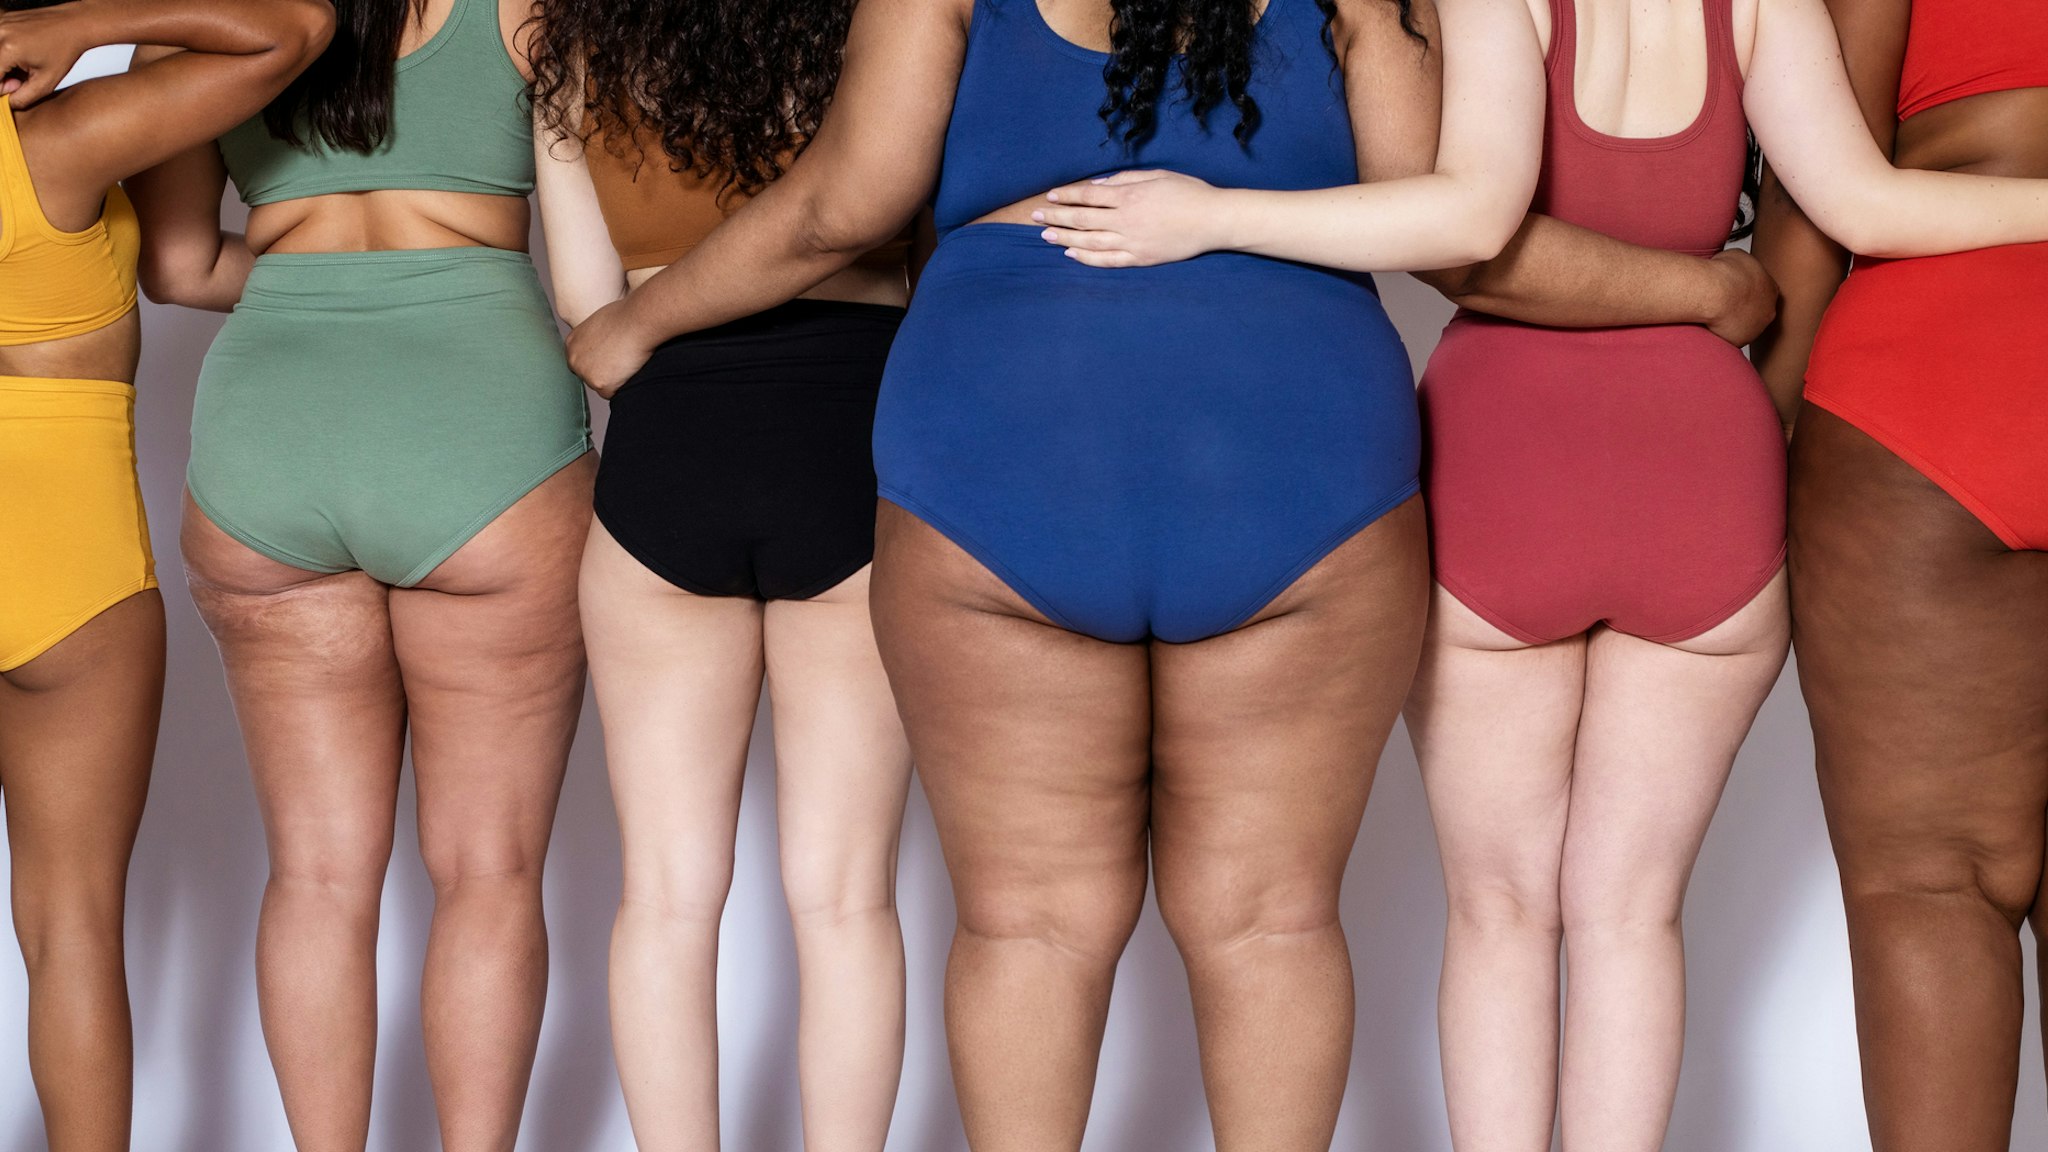 Rear view of group of women with different body type in underwear standing together on white background.